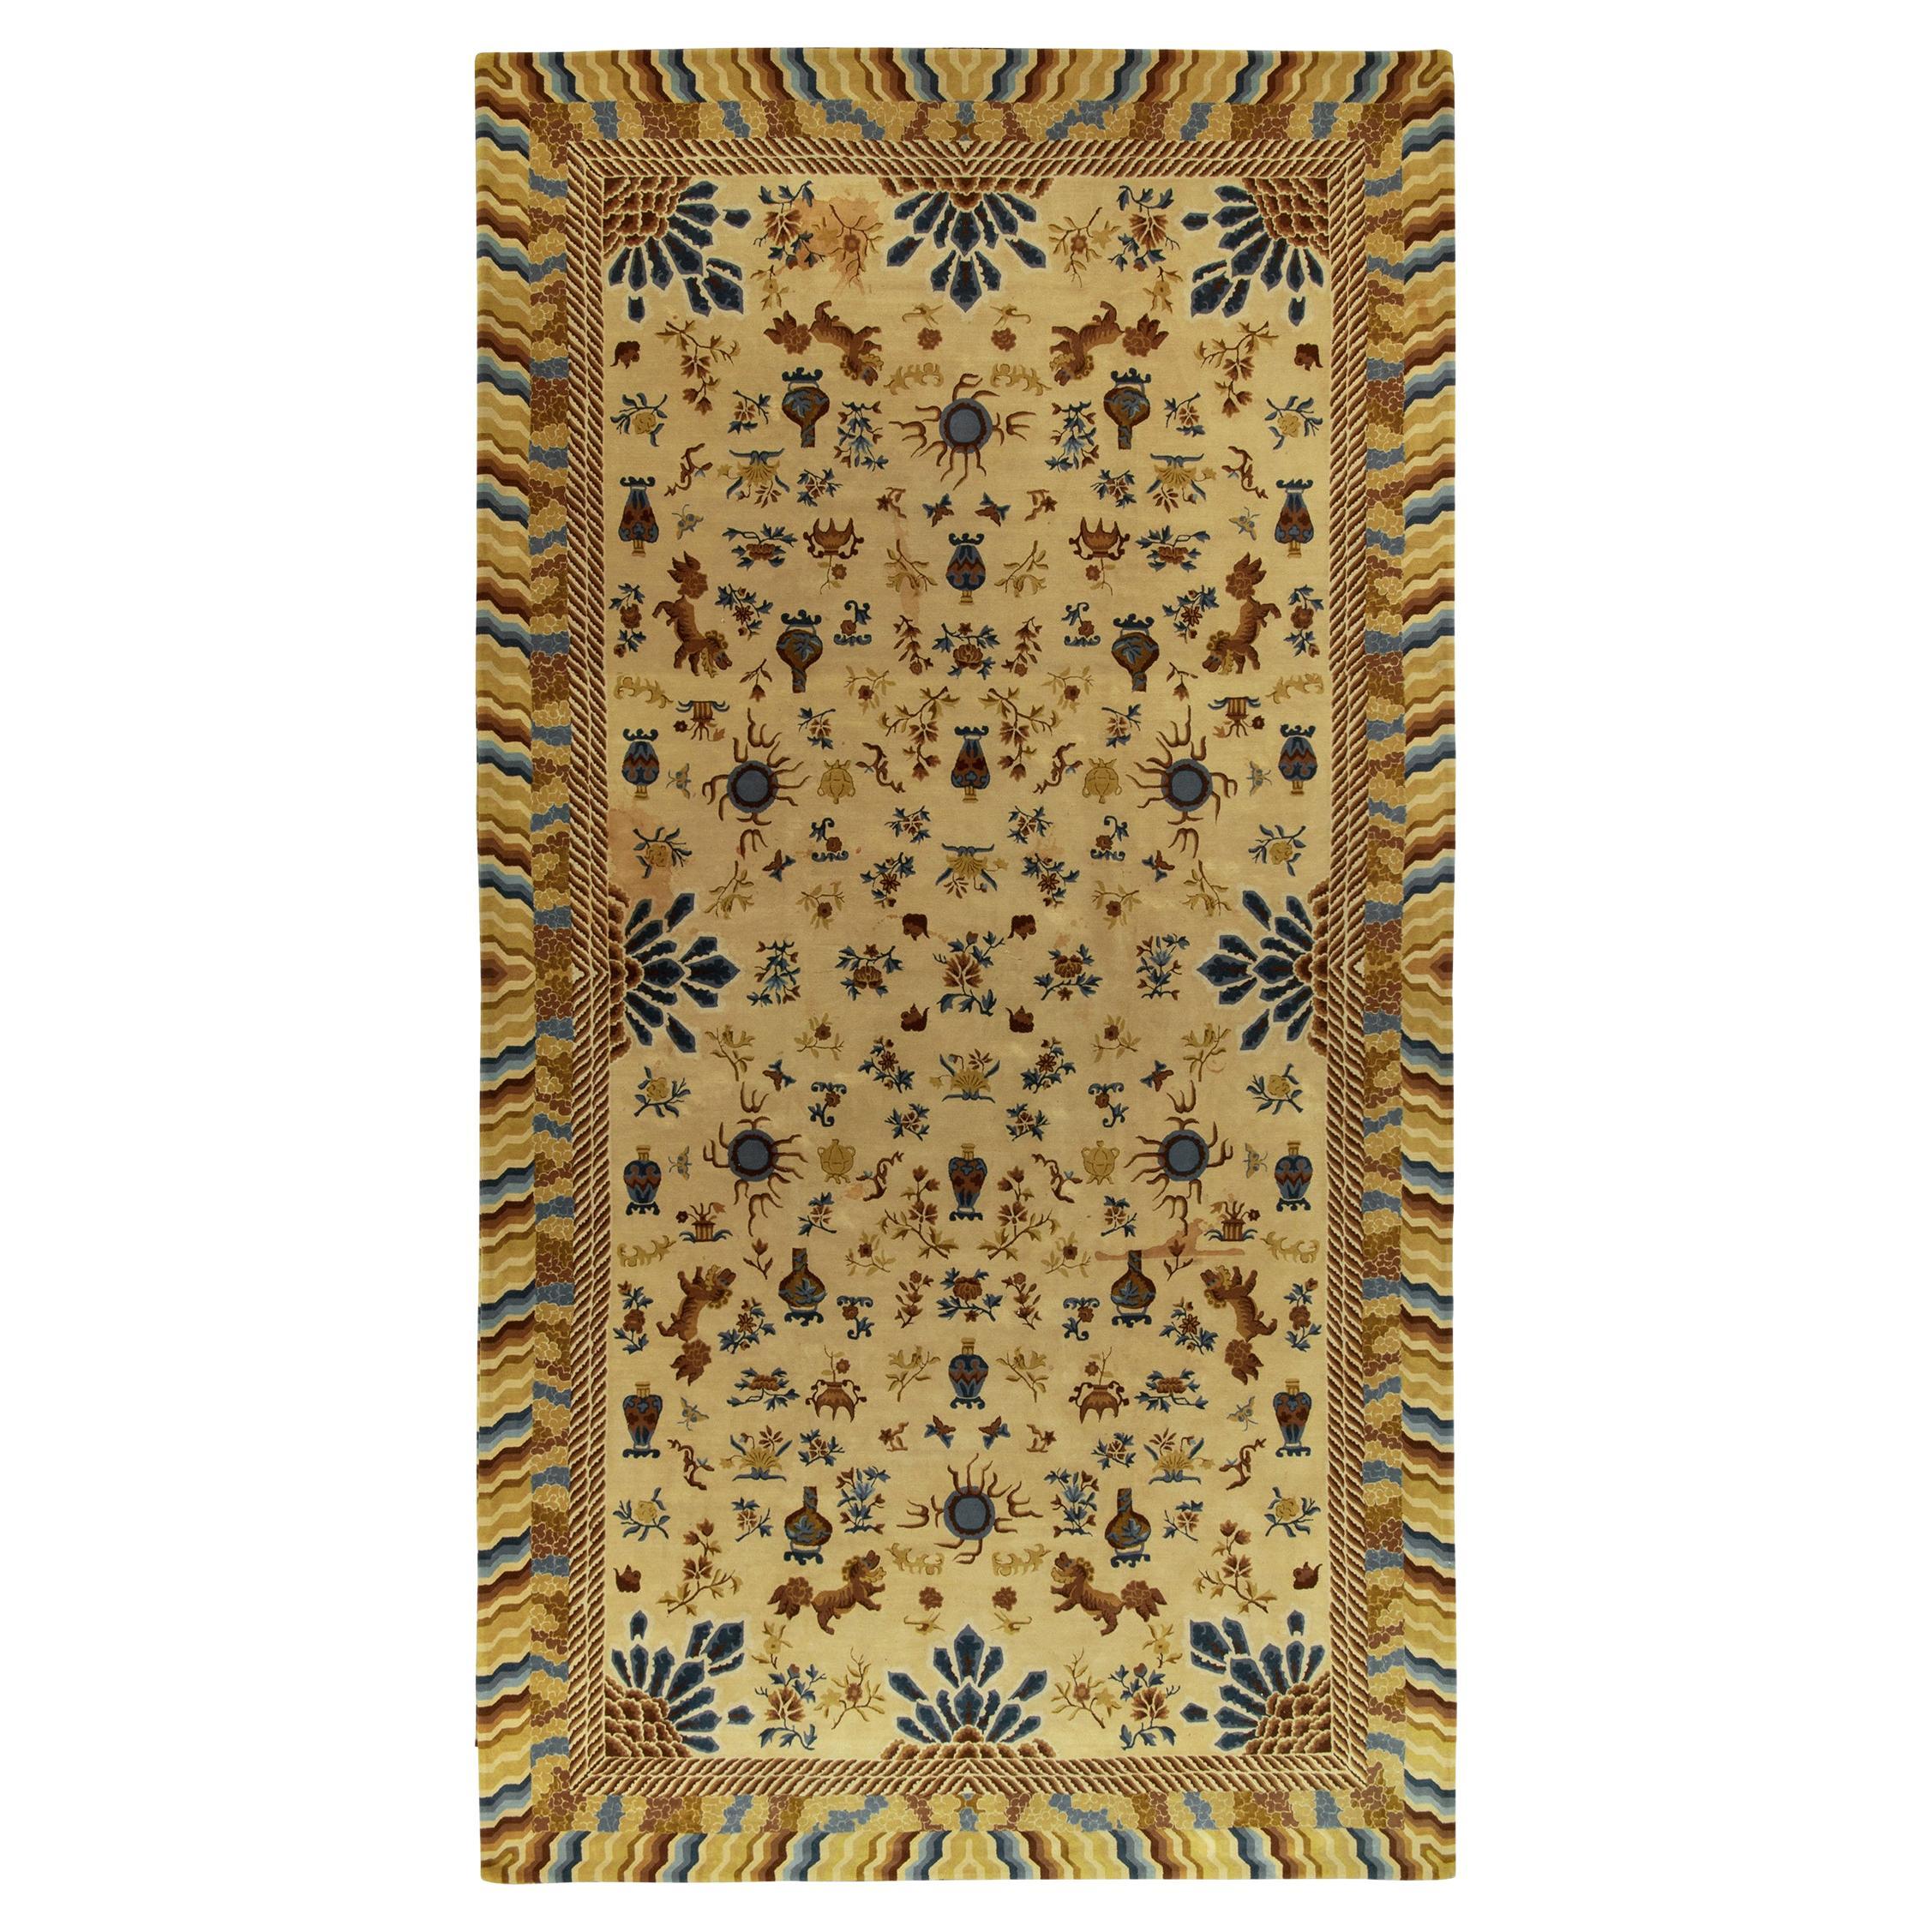 Antique Hooked Rug Gold, Blue & Beige Chinese Pictorial Style by Rug & Kilim